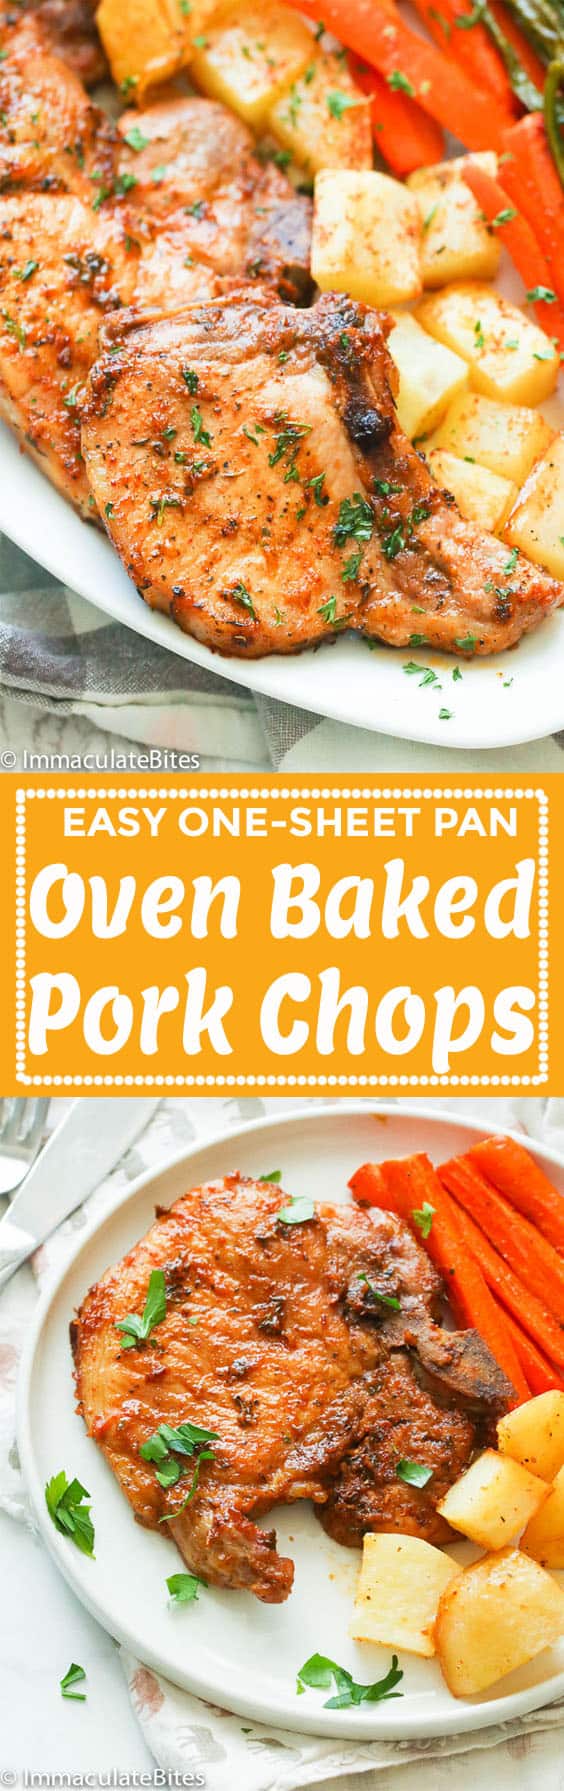 Oven Baked Pork Chops - Immaculate Bites